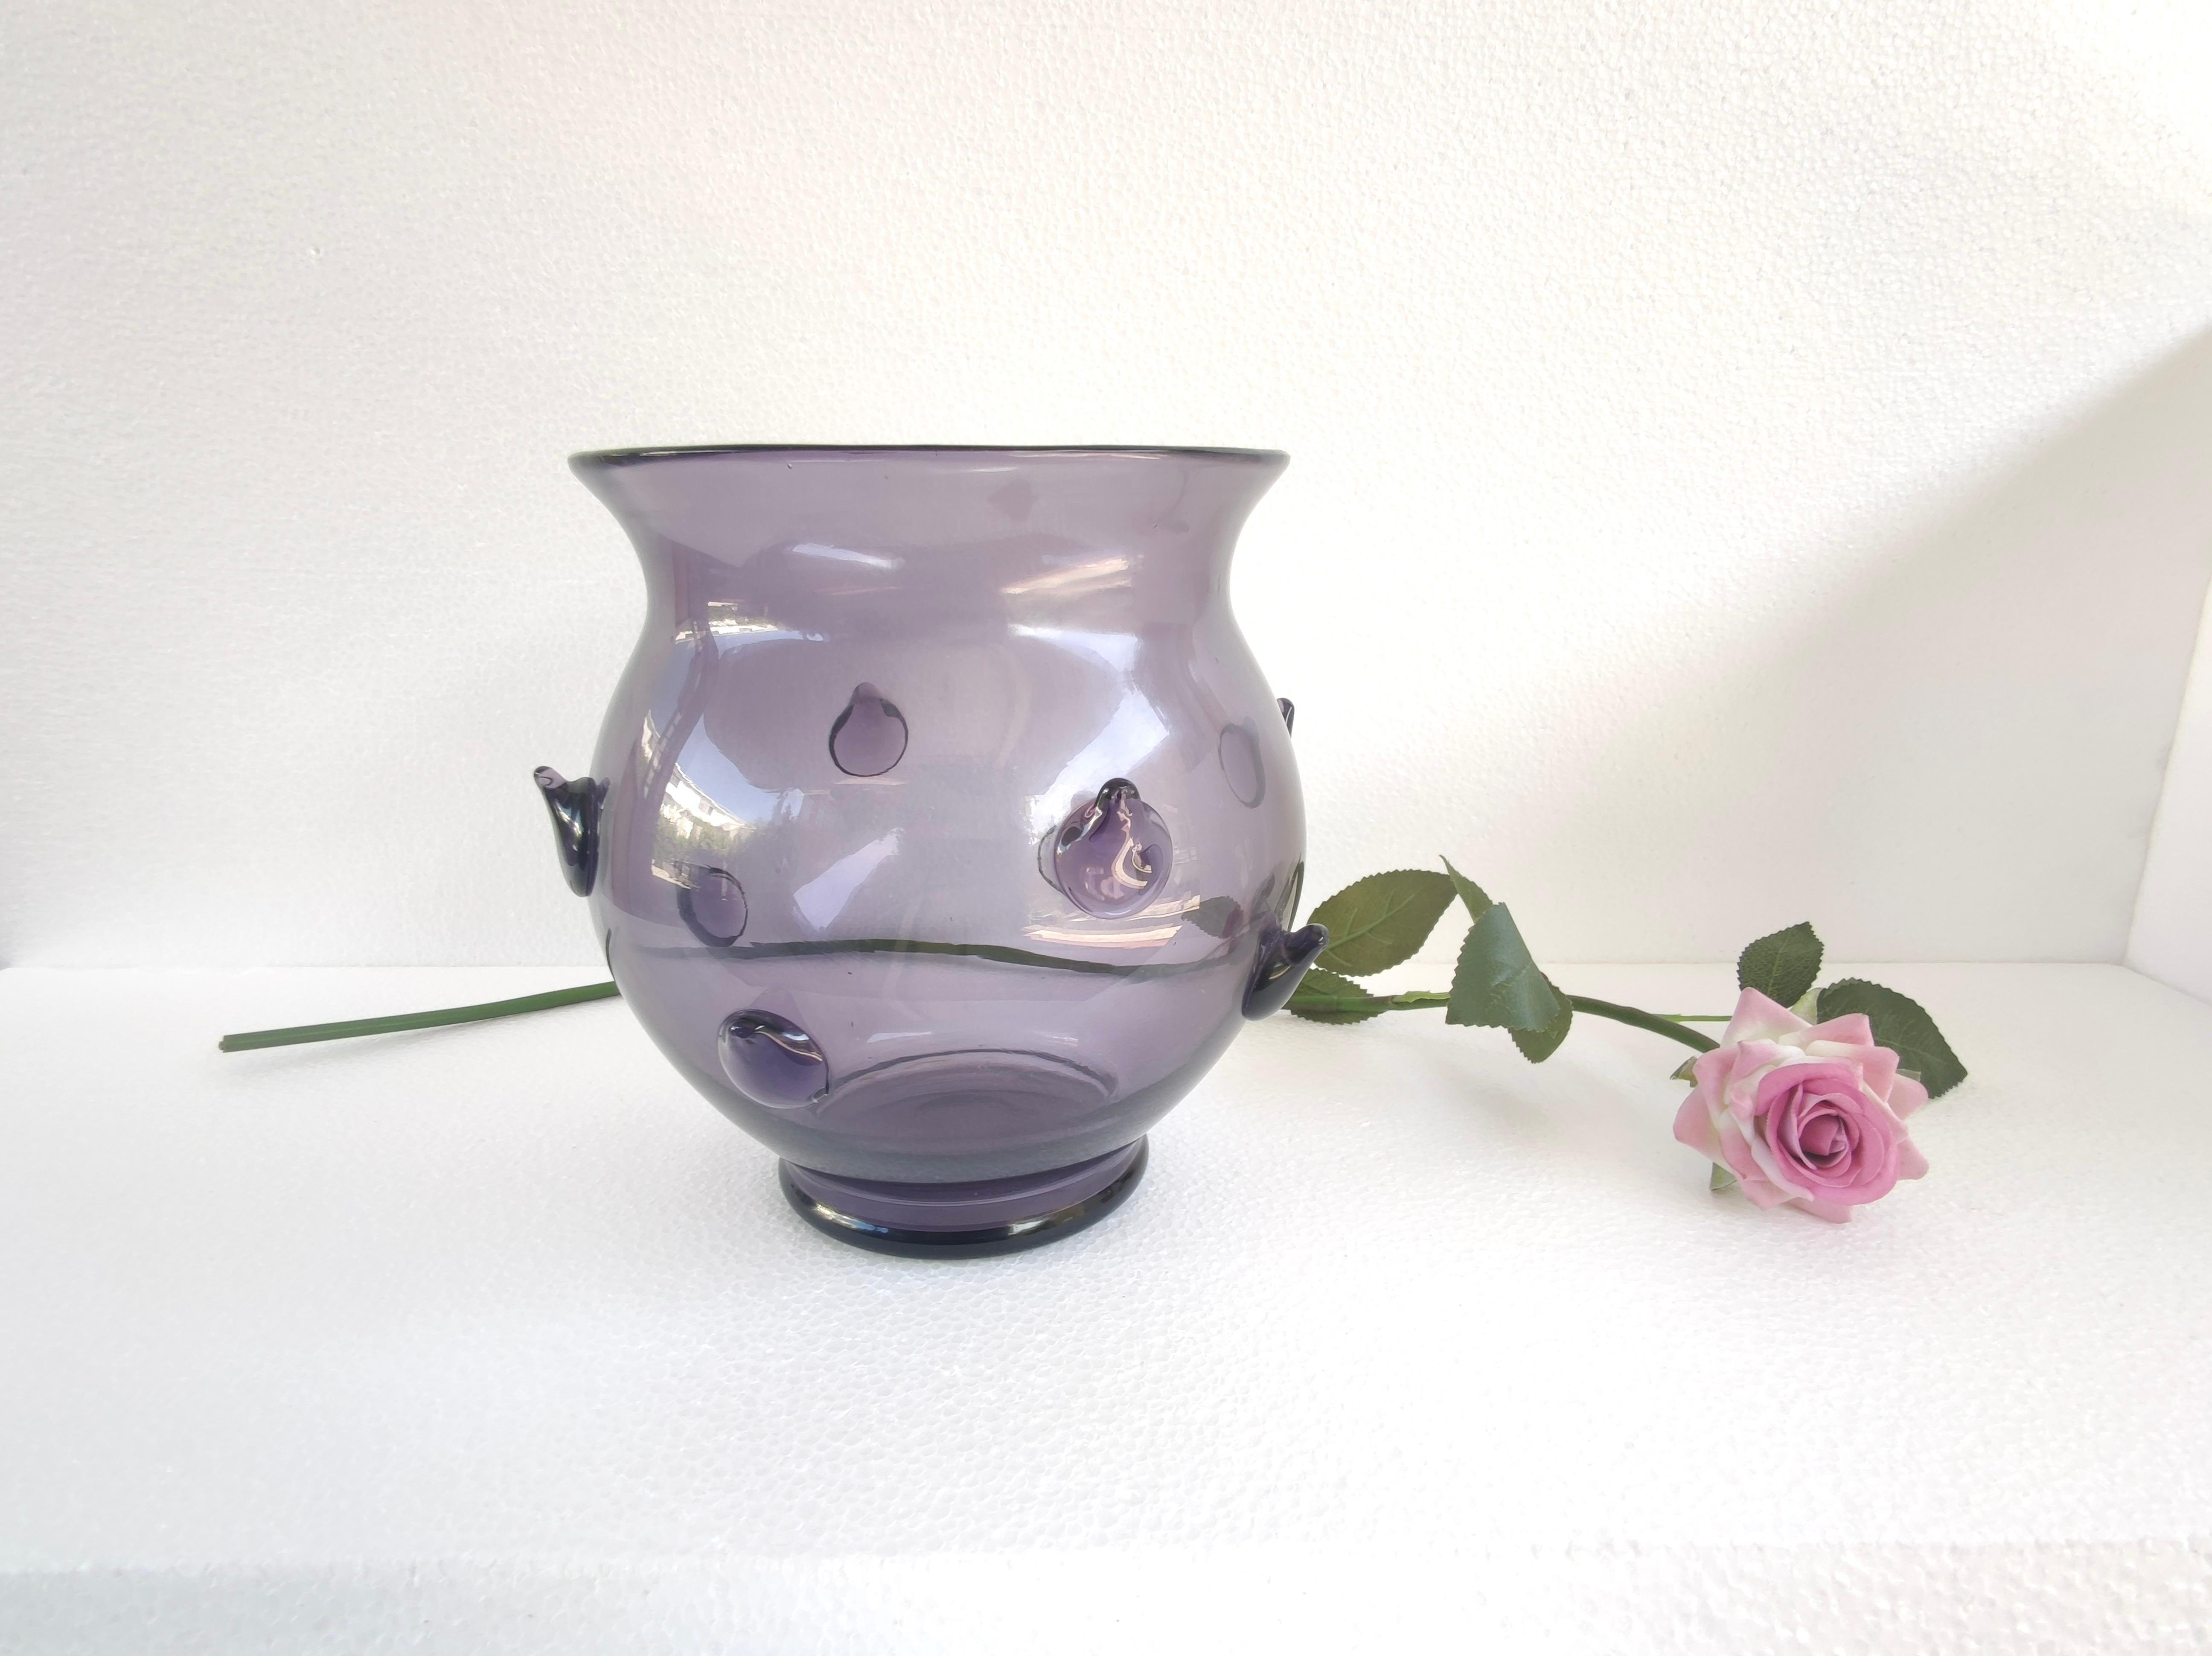 Made in Italy, 1920s 
This vase is made in Murano glass with upwards points.
It is a vintage item, therefore it might show slight traces of use, but it can be considered as in excellent original condition and ready to become a piece in a